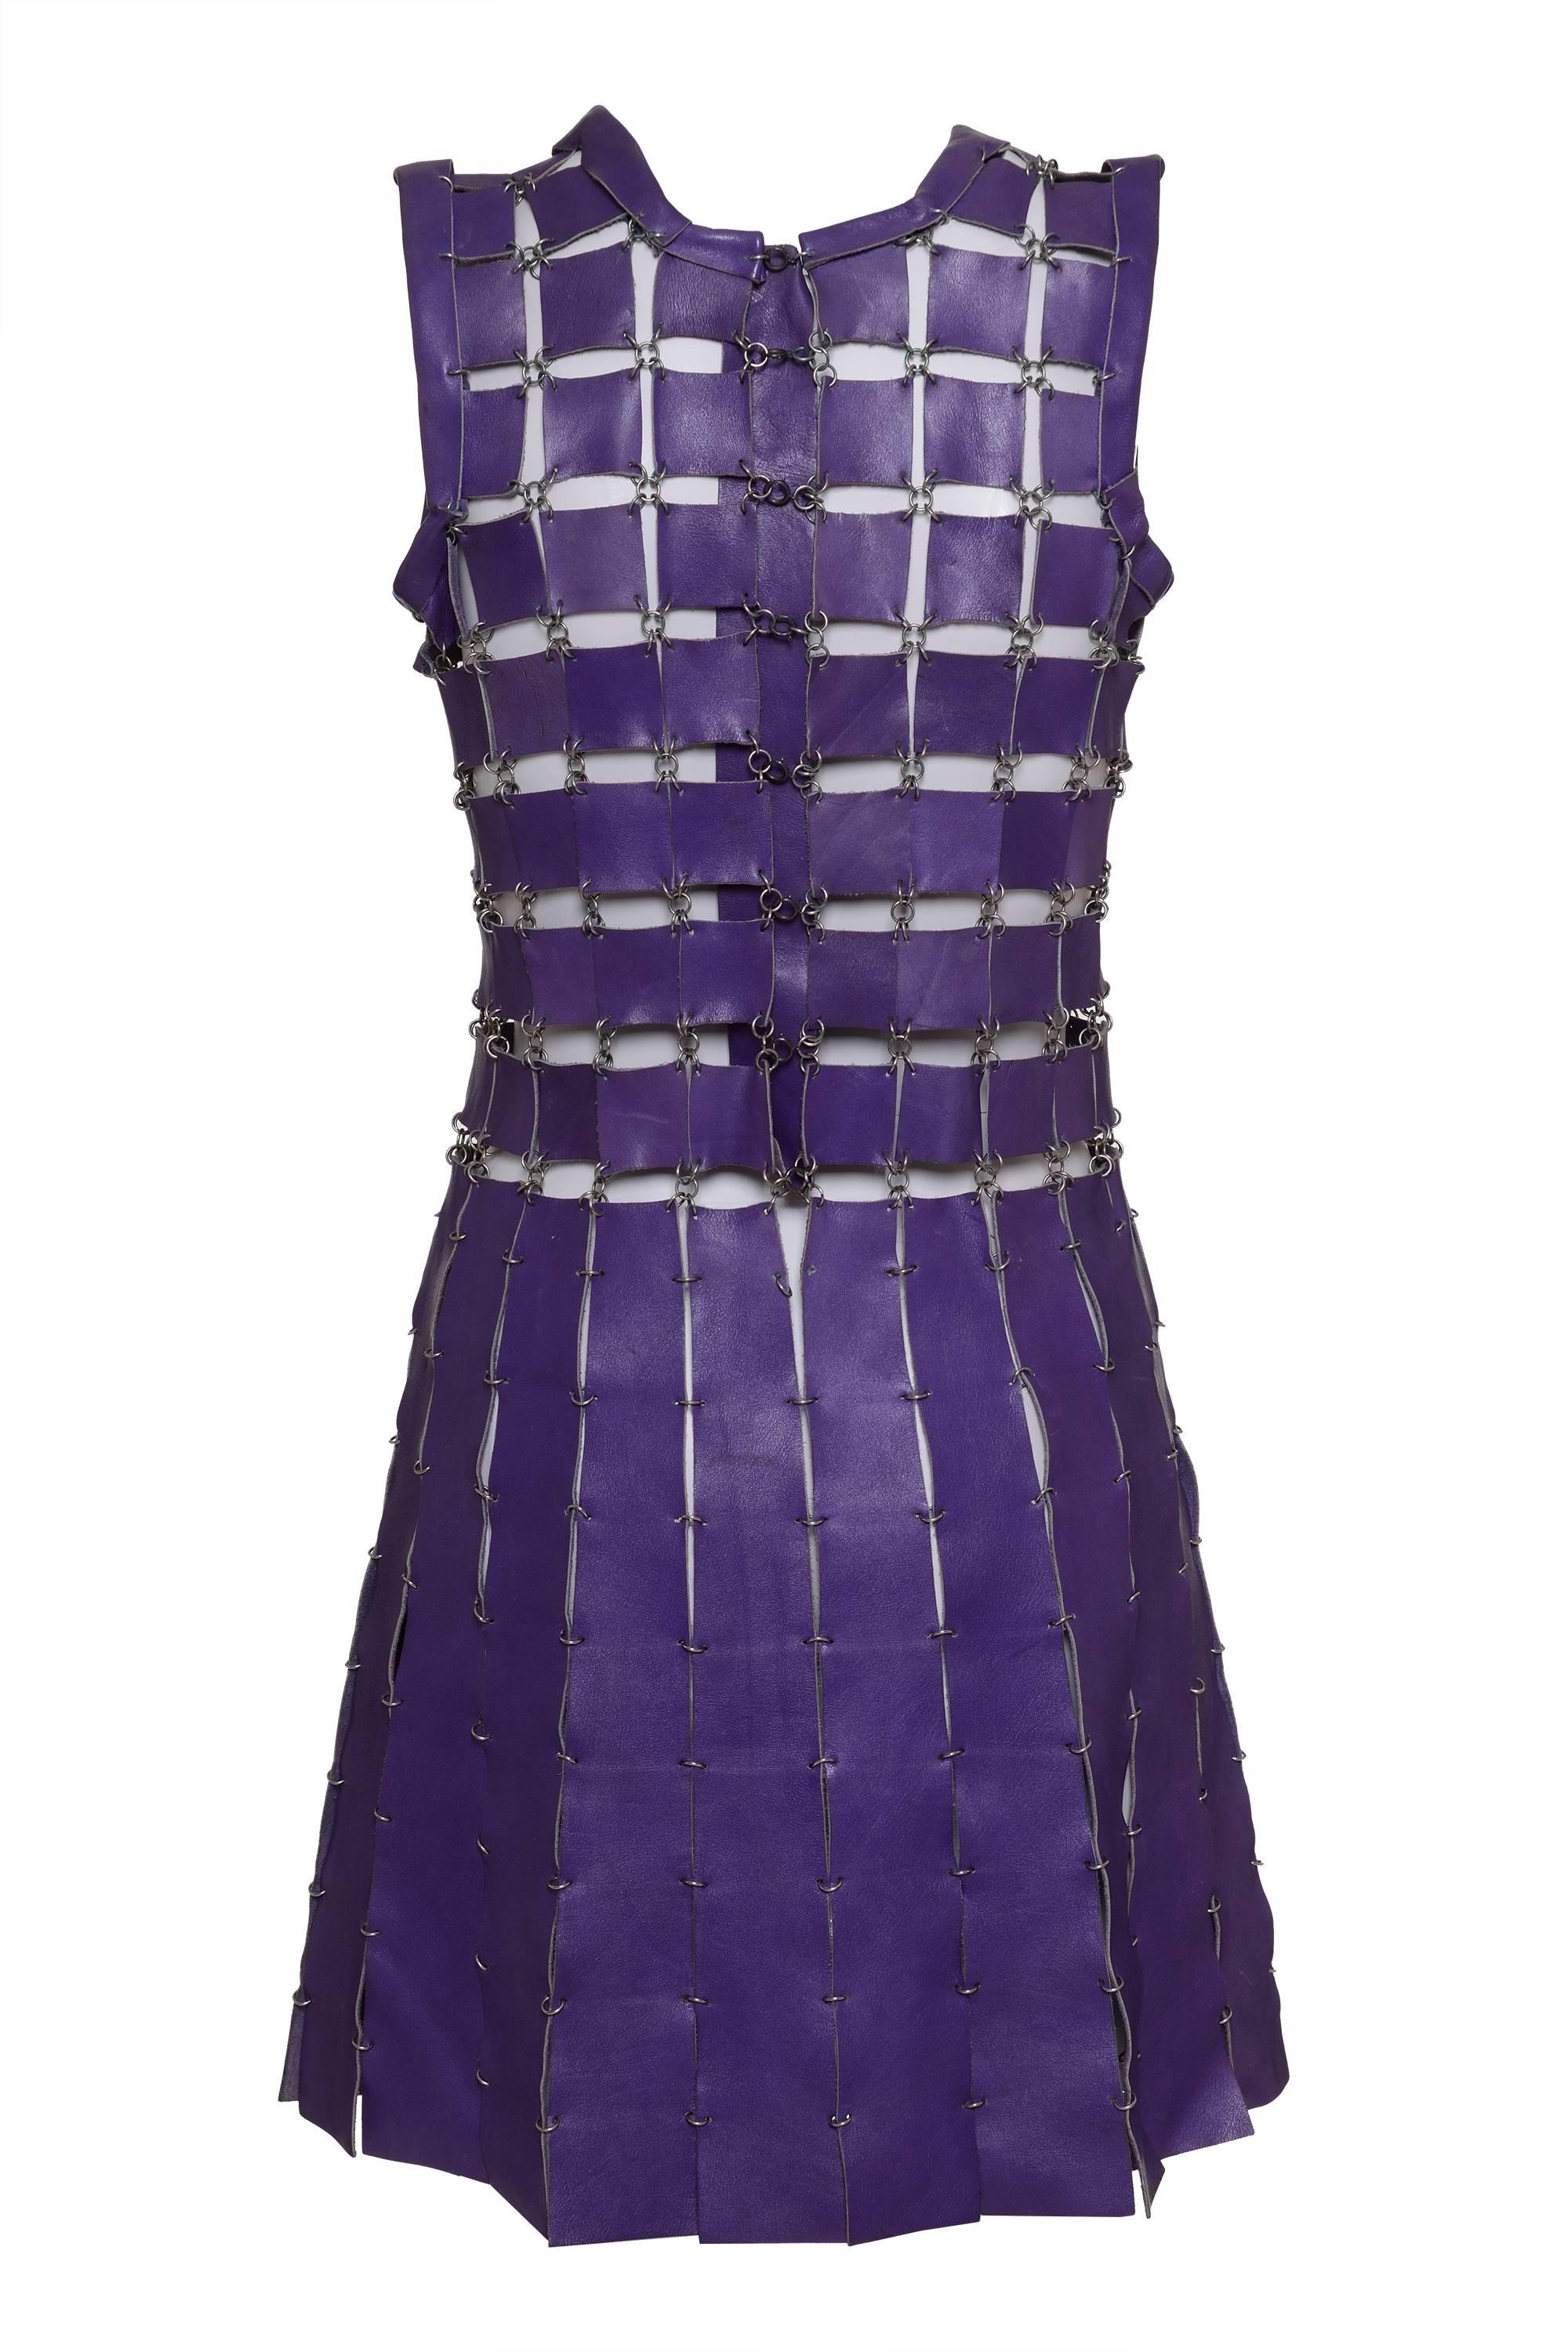 This stunning PACO RABANNE 1960s Dress is in purple leather and silver circular chains to fit each piece of leather, and has spring ring closure. 
Amazing rare and authentic collectible piece.

Excellent vintage condition

Label: PACO RABANNE Paris